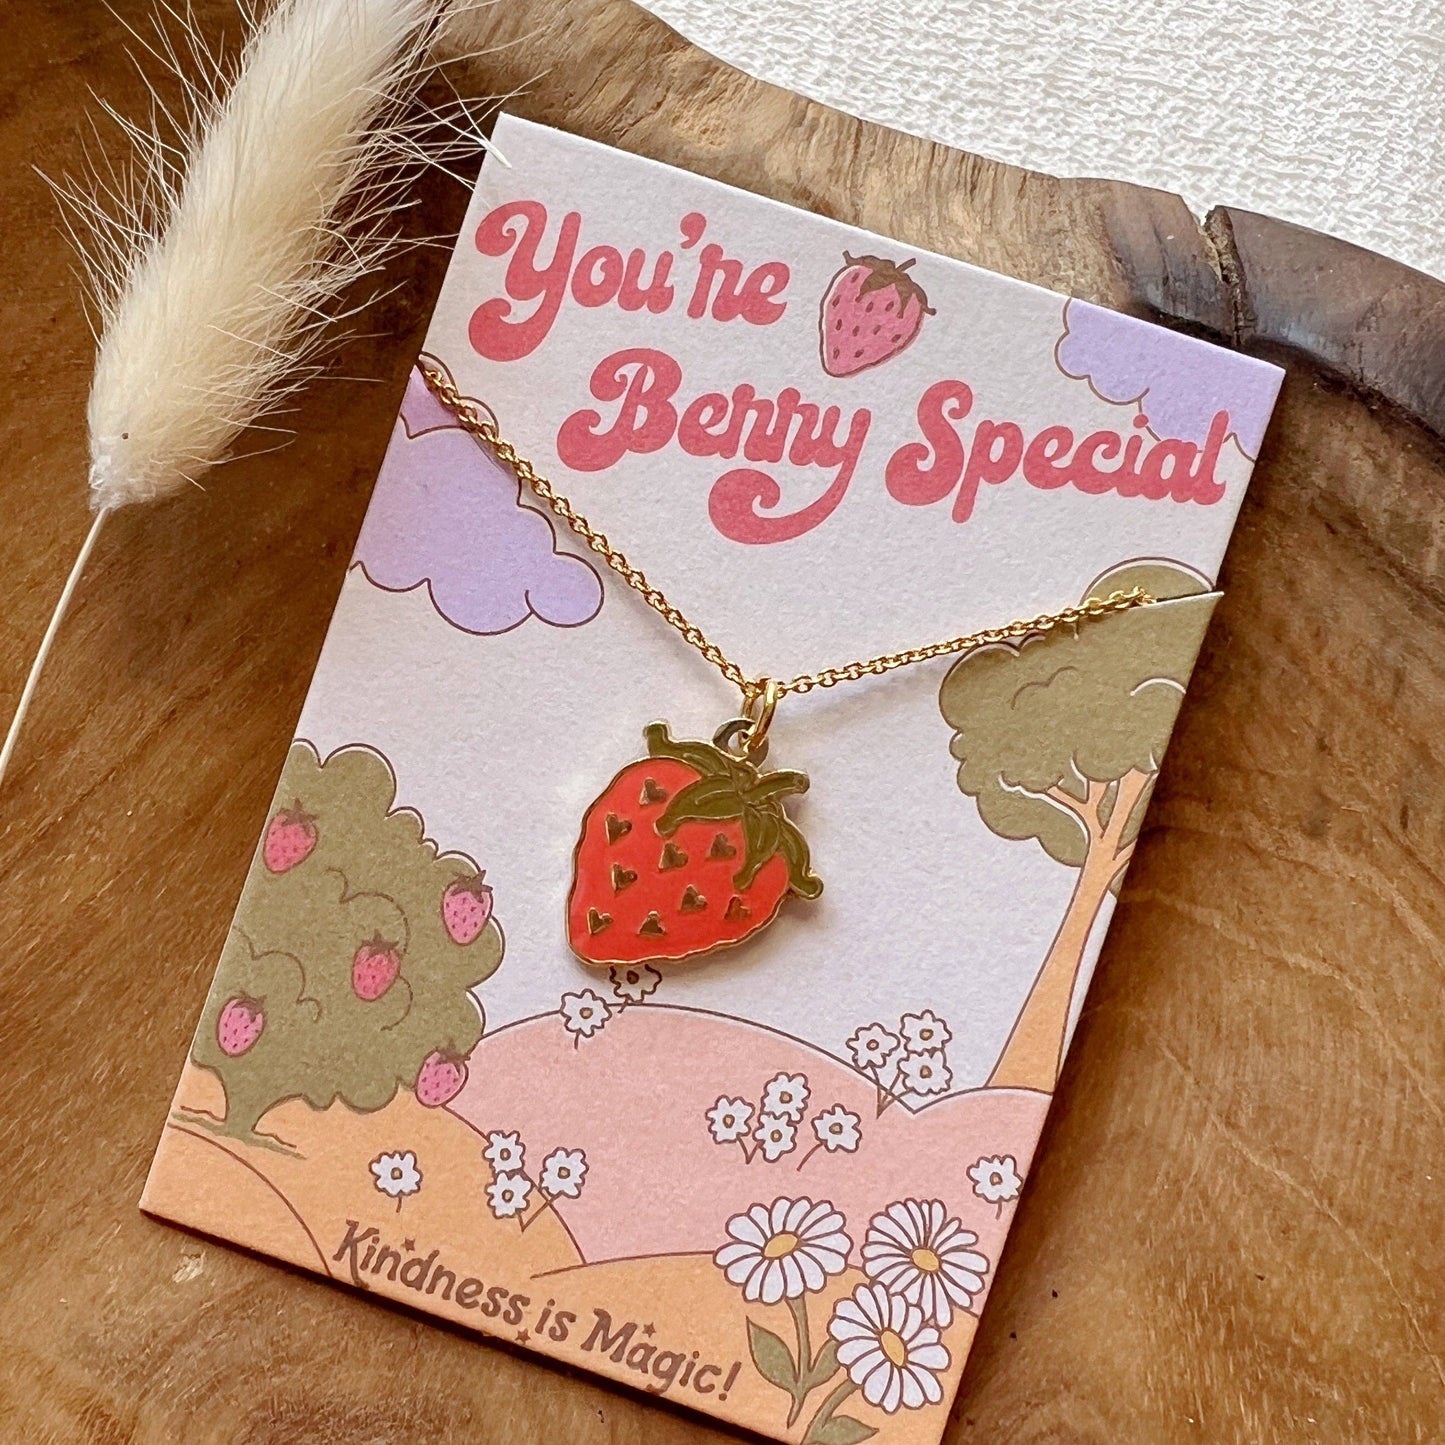 You're Berry Special - Strawberry Necklace